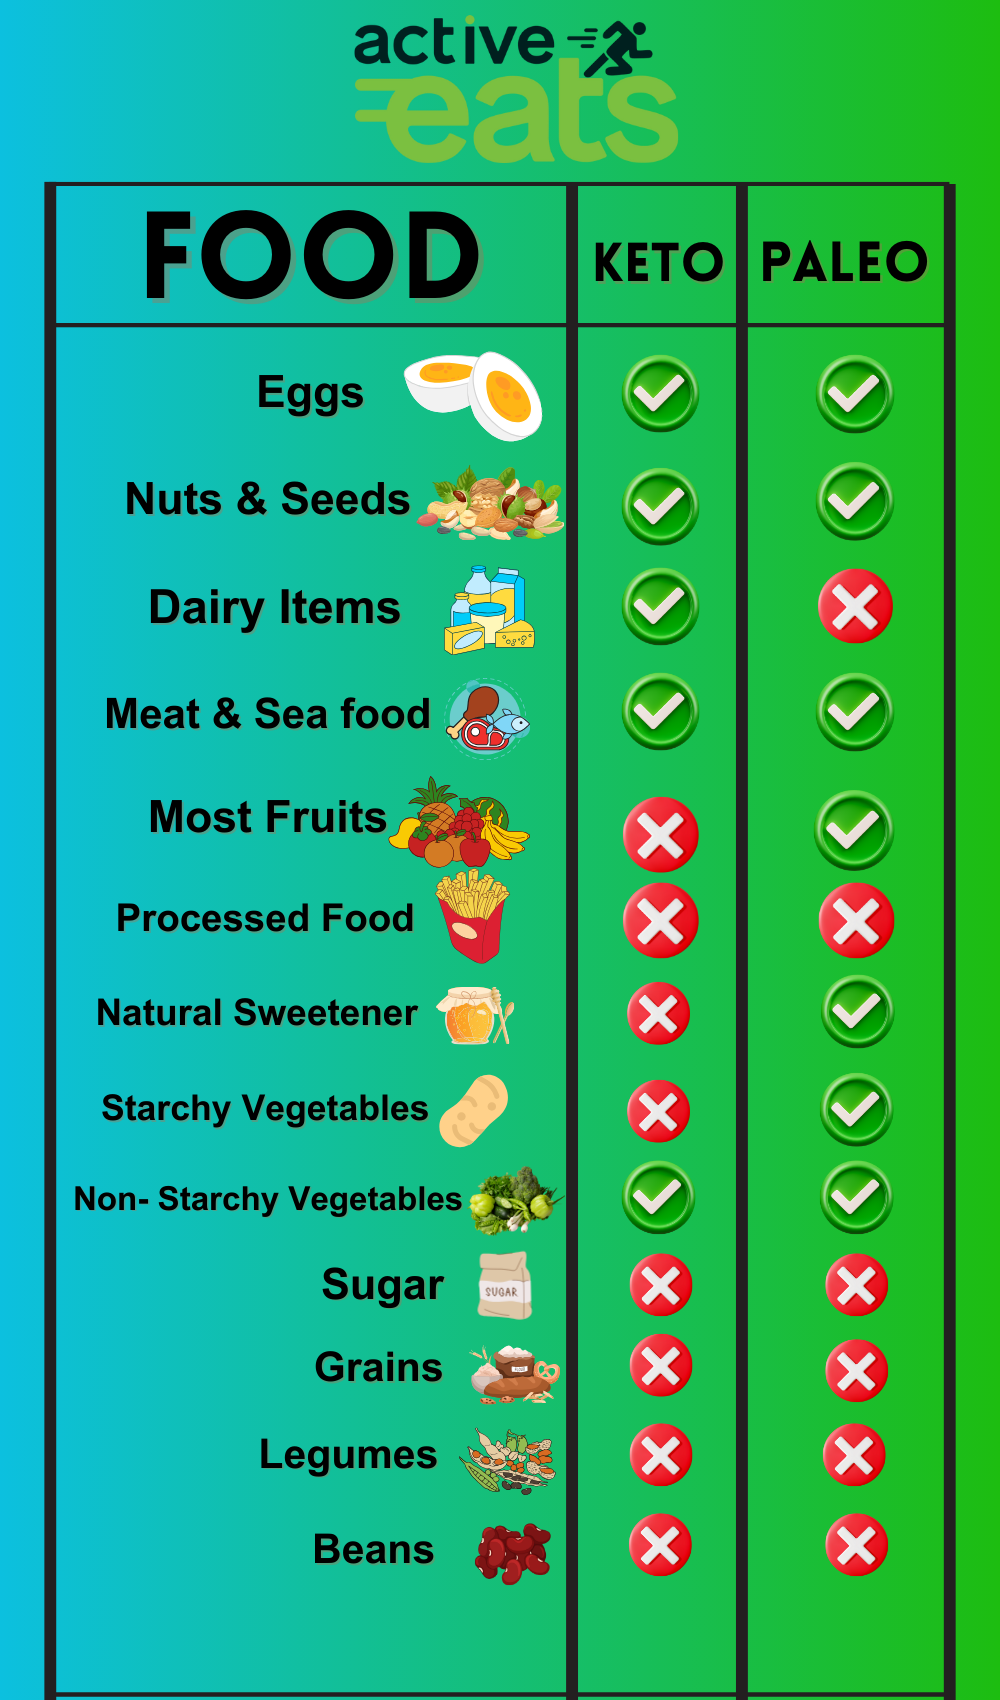 Comparison Chart of Keto and Paleo Diet shows various food items segregated under the two categories,